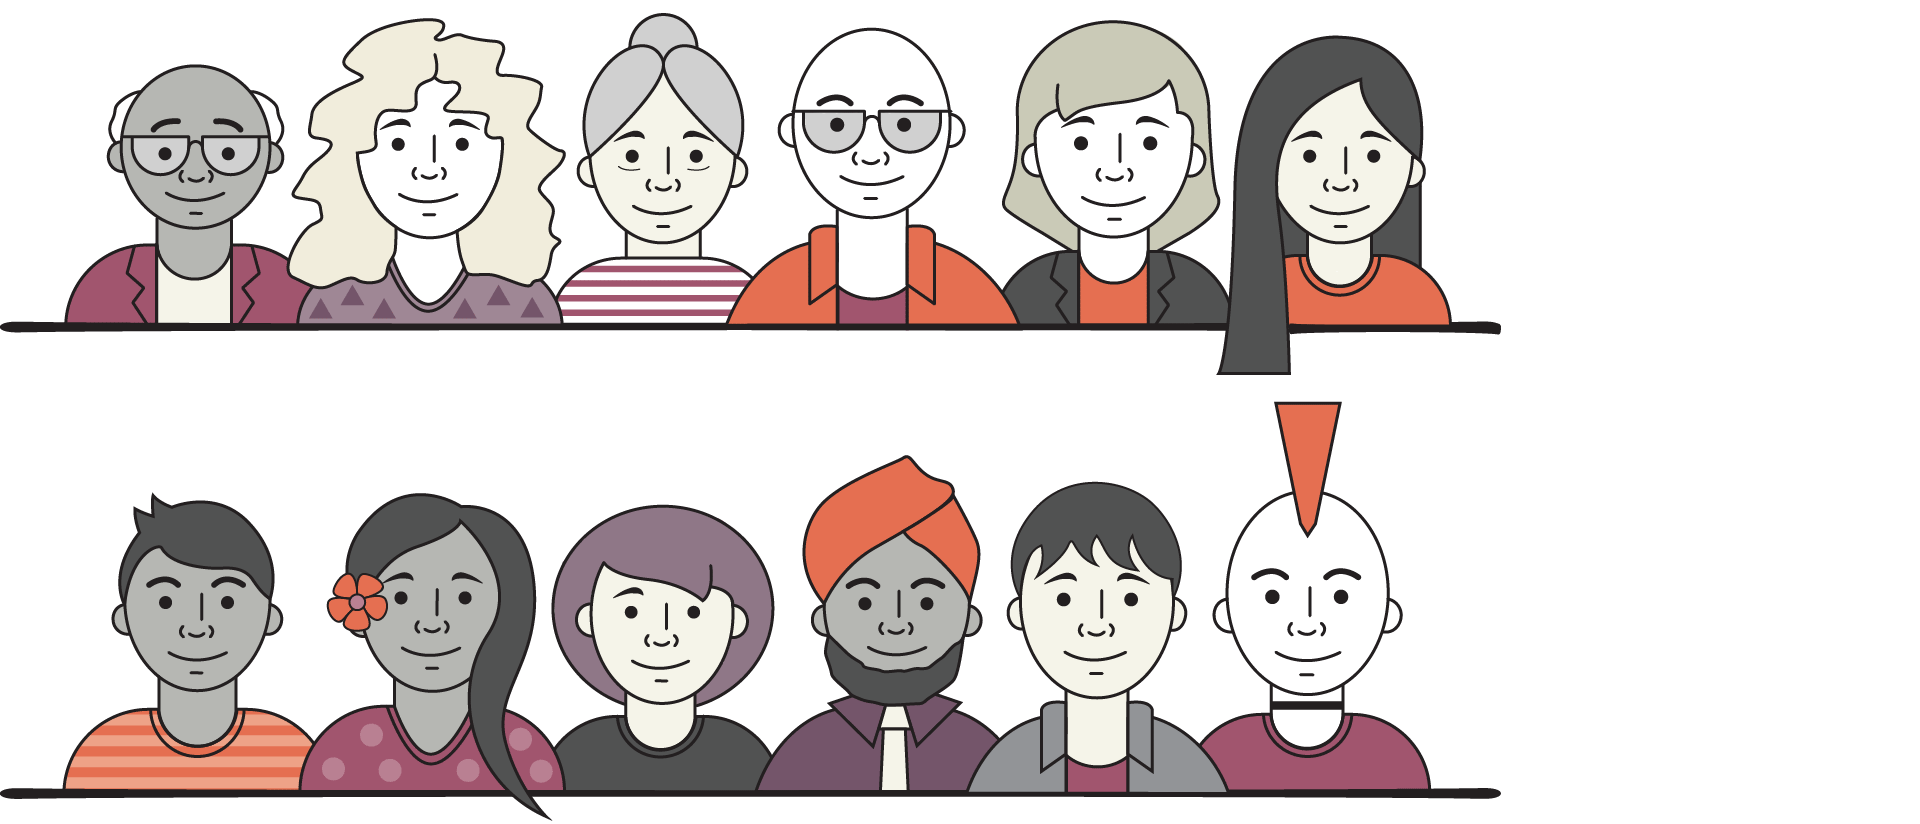 A group of diverse people of different ethnicities, genders and age.